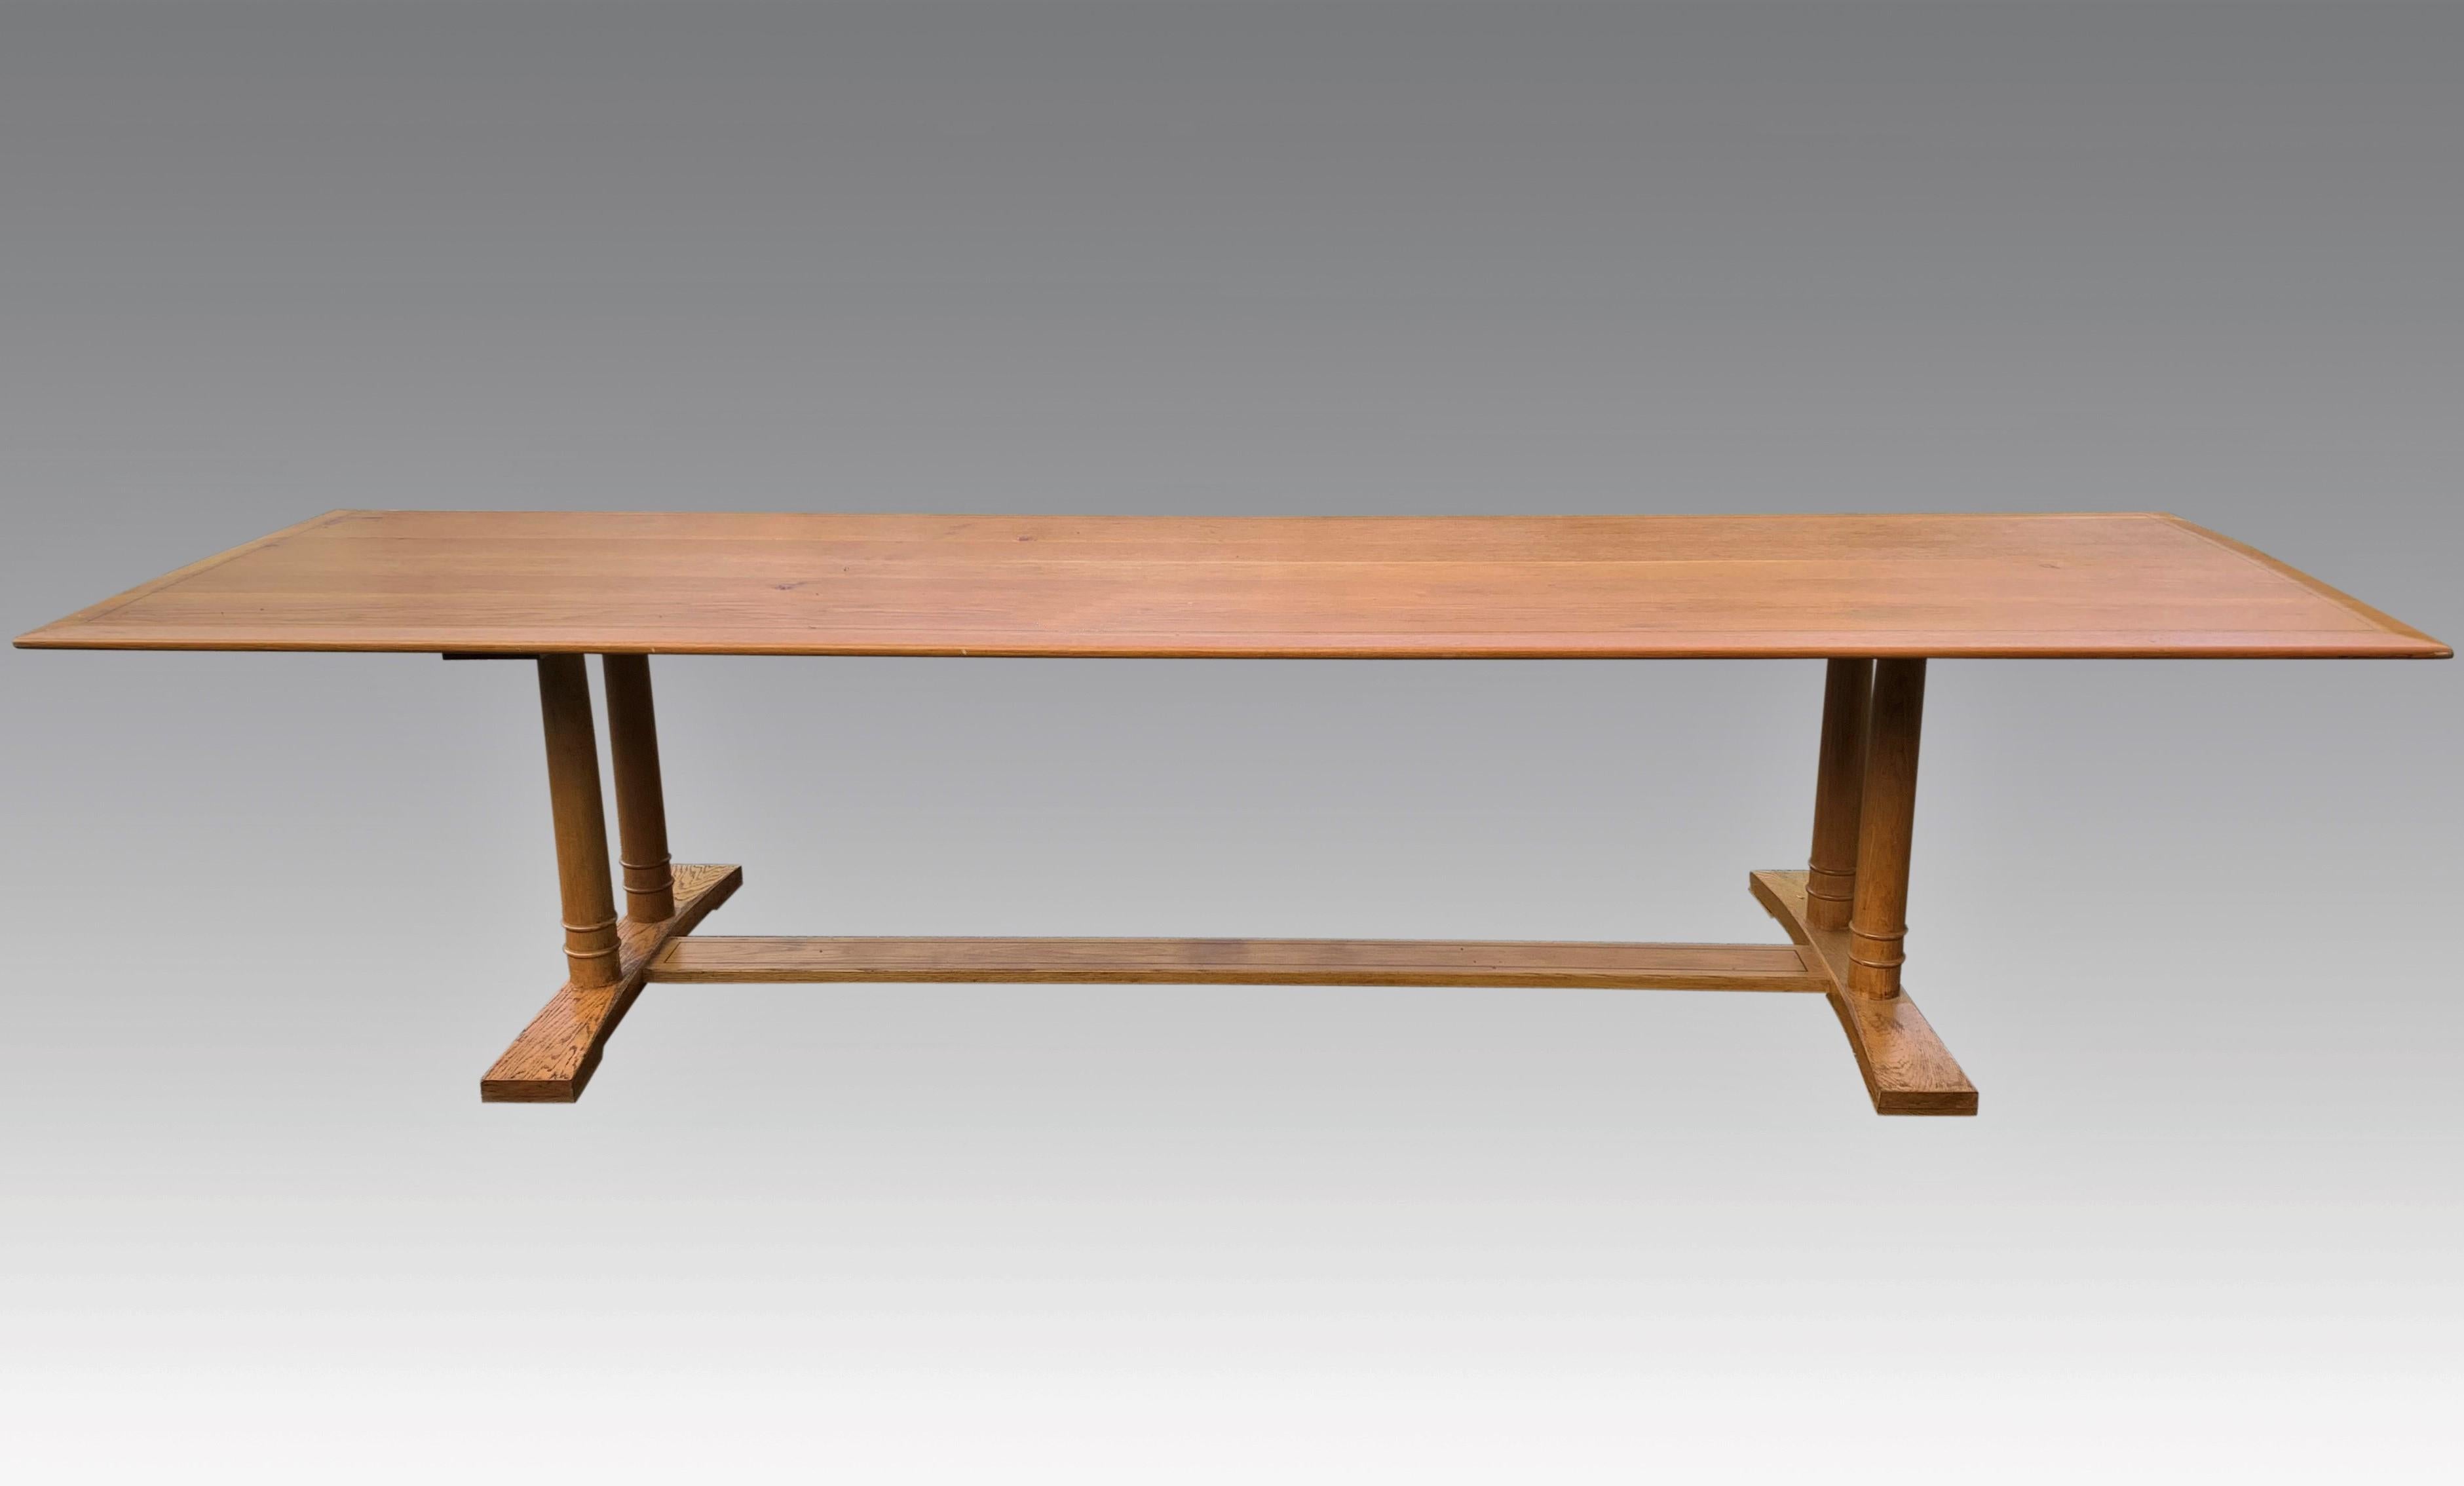 A unique 3.35 metre long conference or dining table by Luke Hughes. This table was specially commissioned for a friend of the family to use as a 12-14 seater dining table for a beultiful, grade 1 listed period property in the Sussex countryside. it